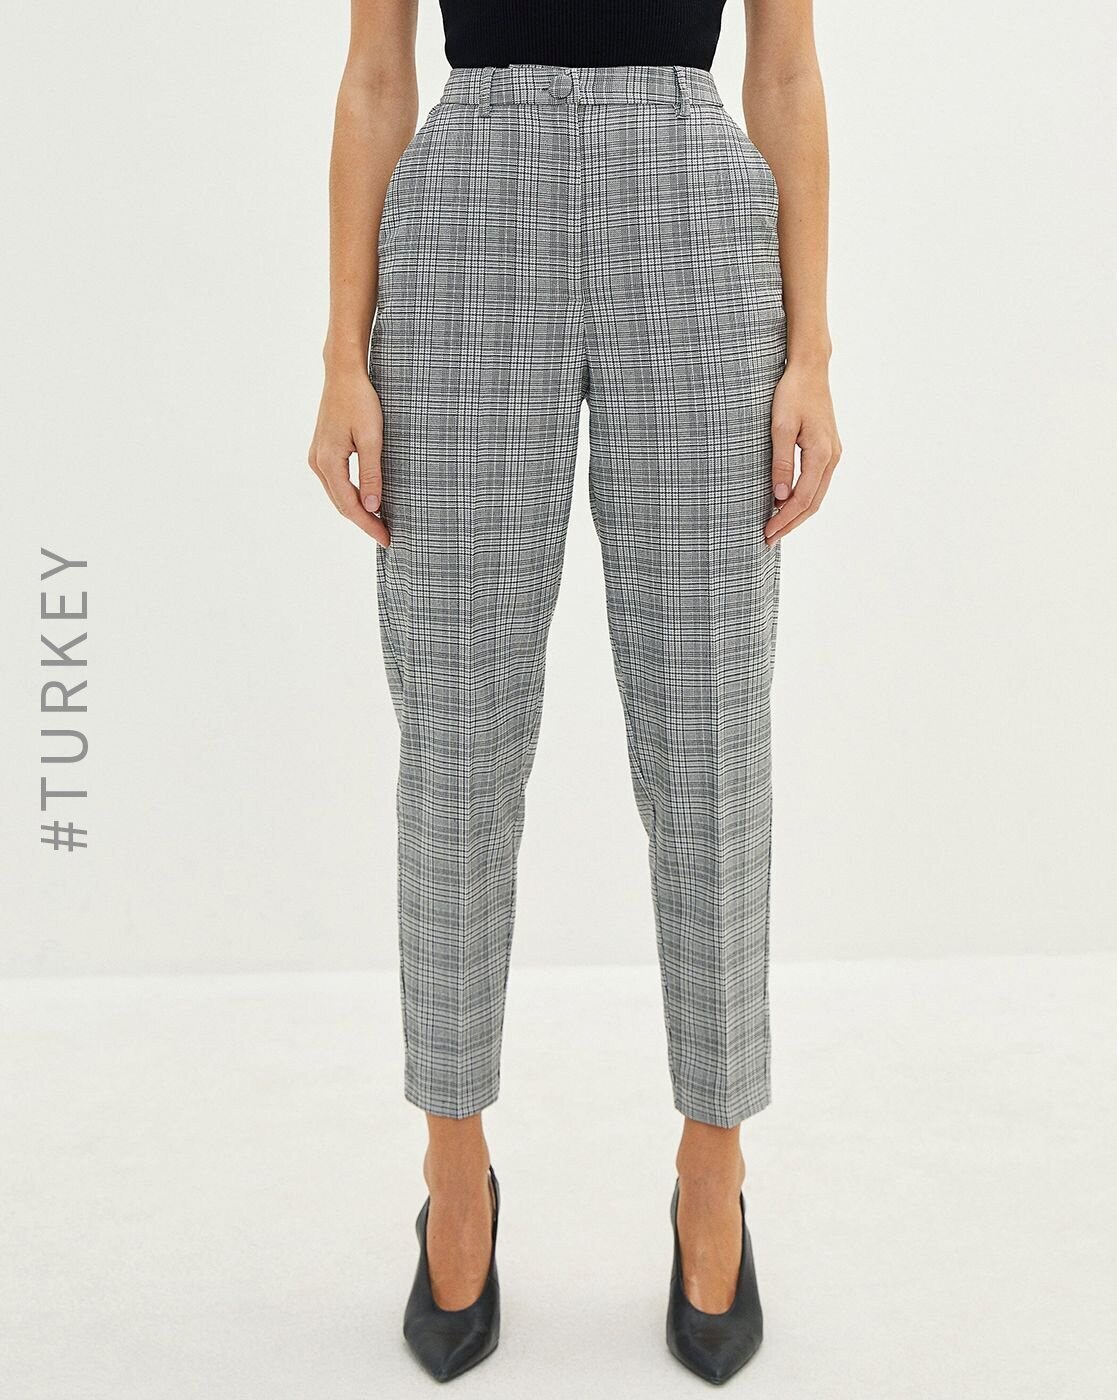 Our Pick Zara High Waist Checked Trousers  Dont You Dare Throw Out These  17 Items  Youll Need Them For 2018  POPSUGAR Fashion Photo 3